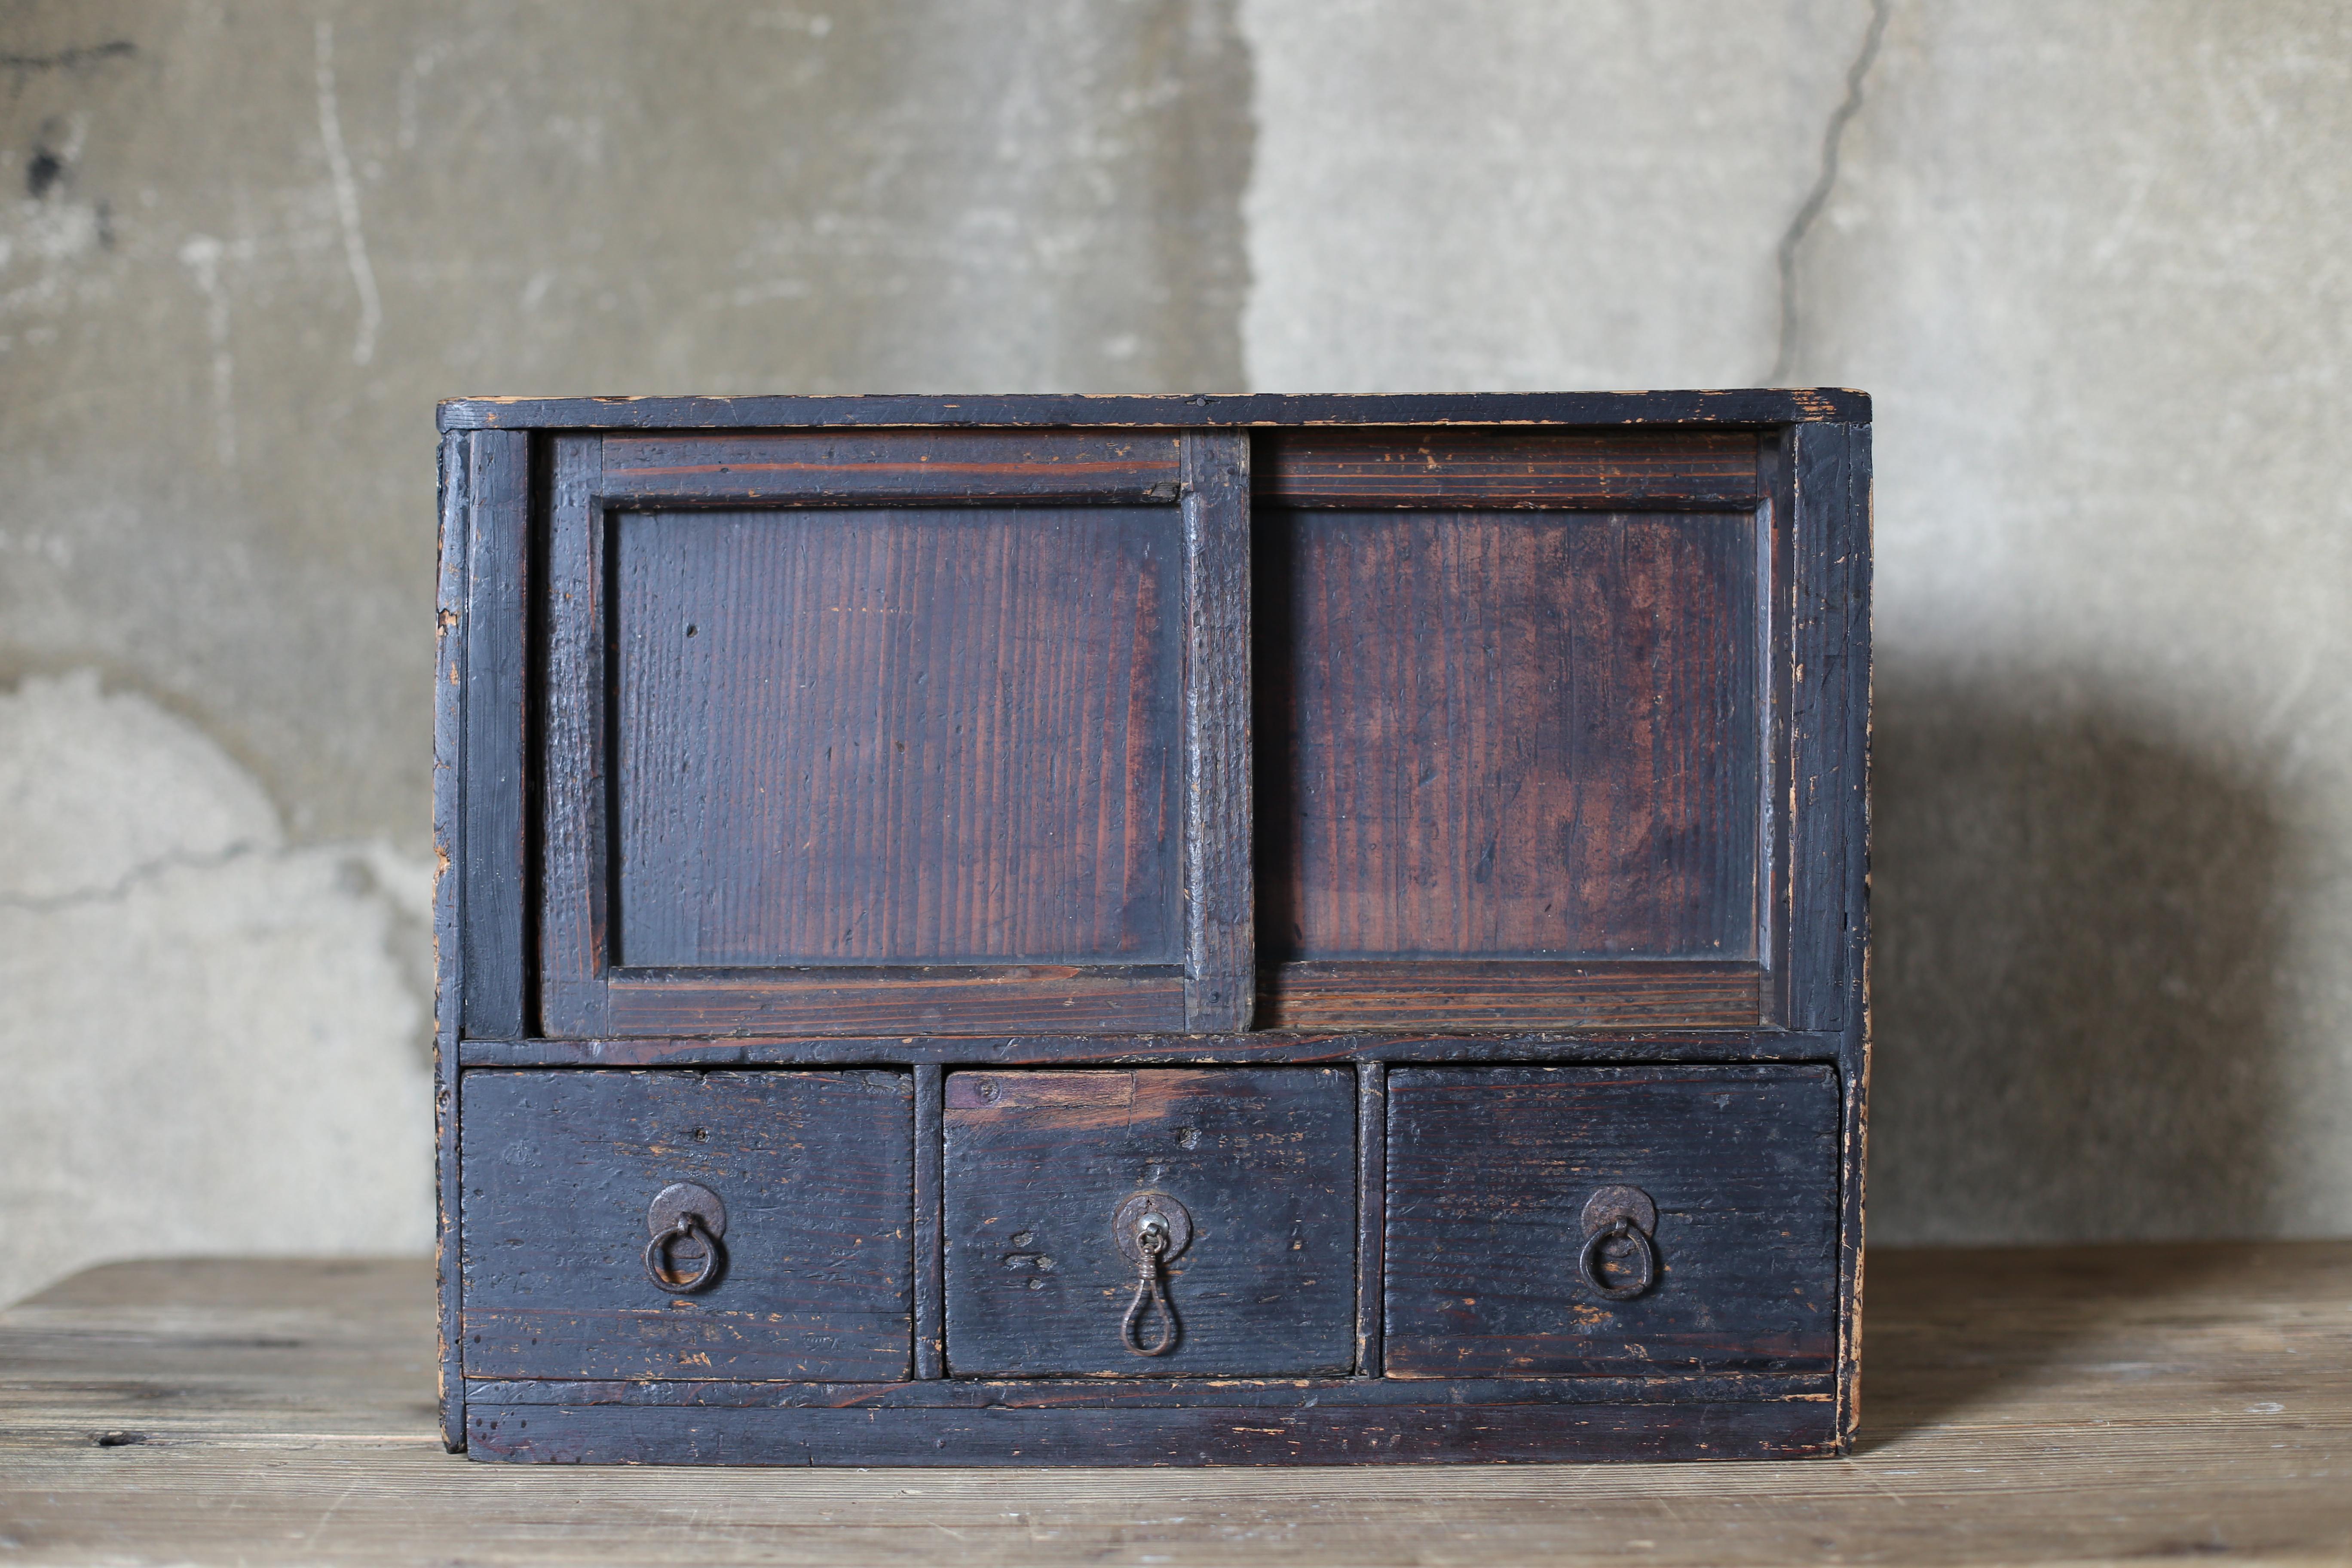 It is an old Japanese drawer.
It is an item from the Edo period (1800s-1860s).
It is made of cedar trees.

A simple and beautiful drawer.
There is no waste.

This is black and beautiful.
Why is it black?
Because there is soot.
Japan has a